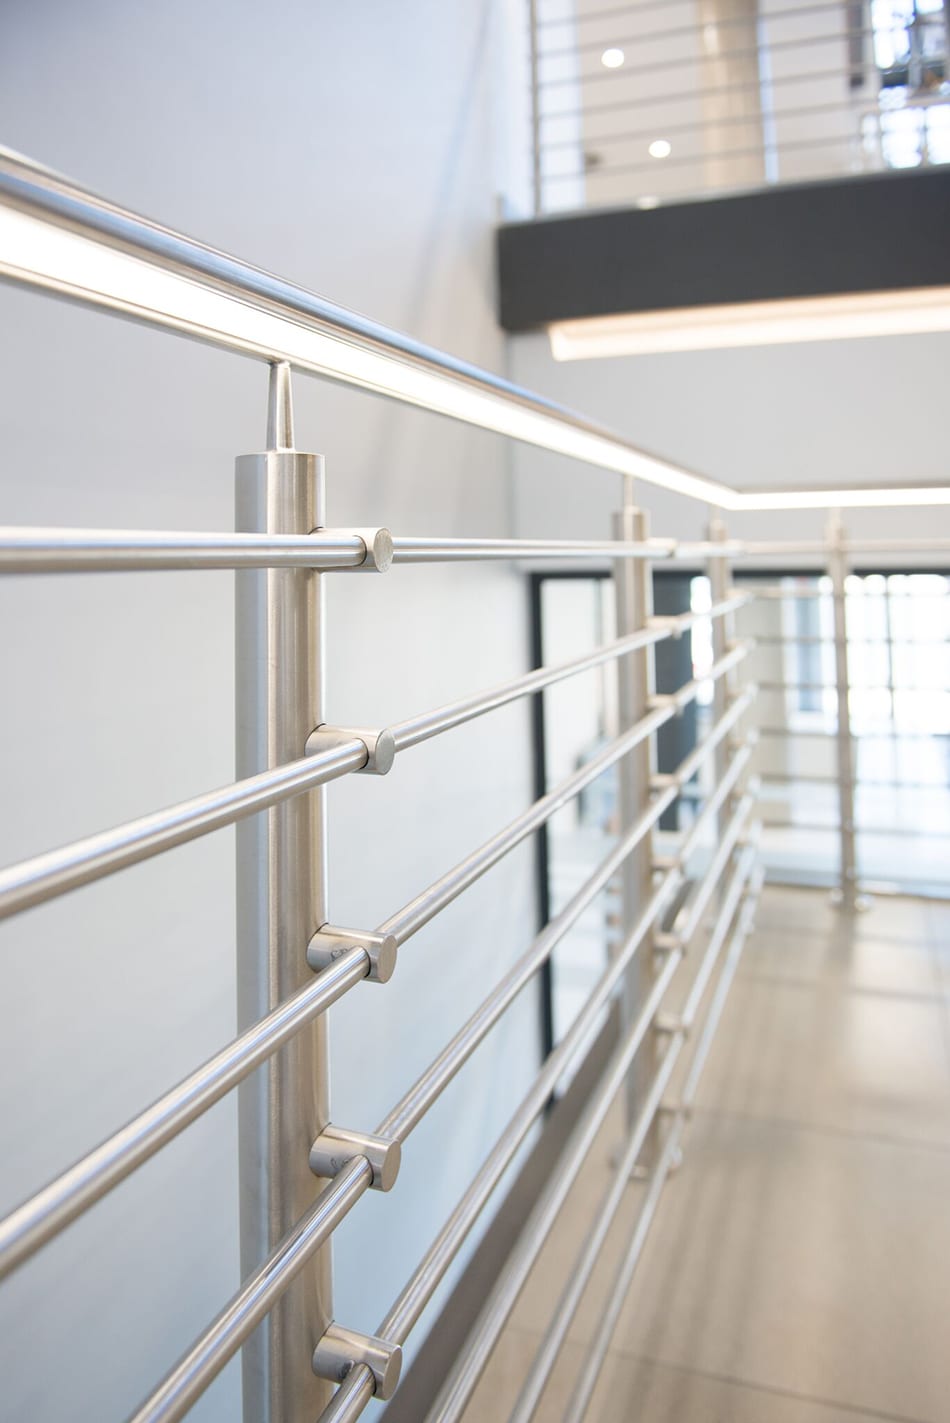 stainless steel balustrading with lighting in the handrail